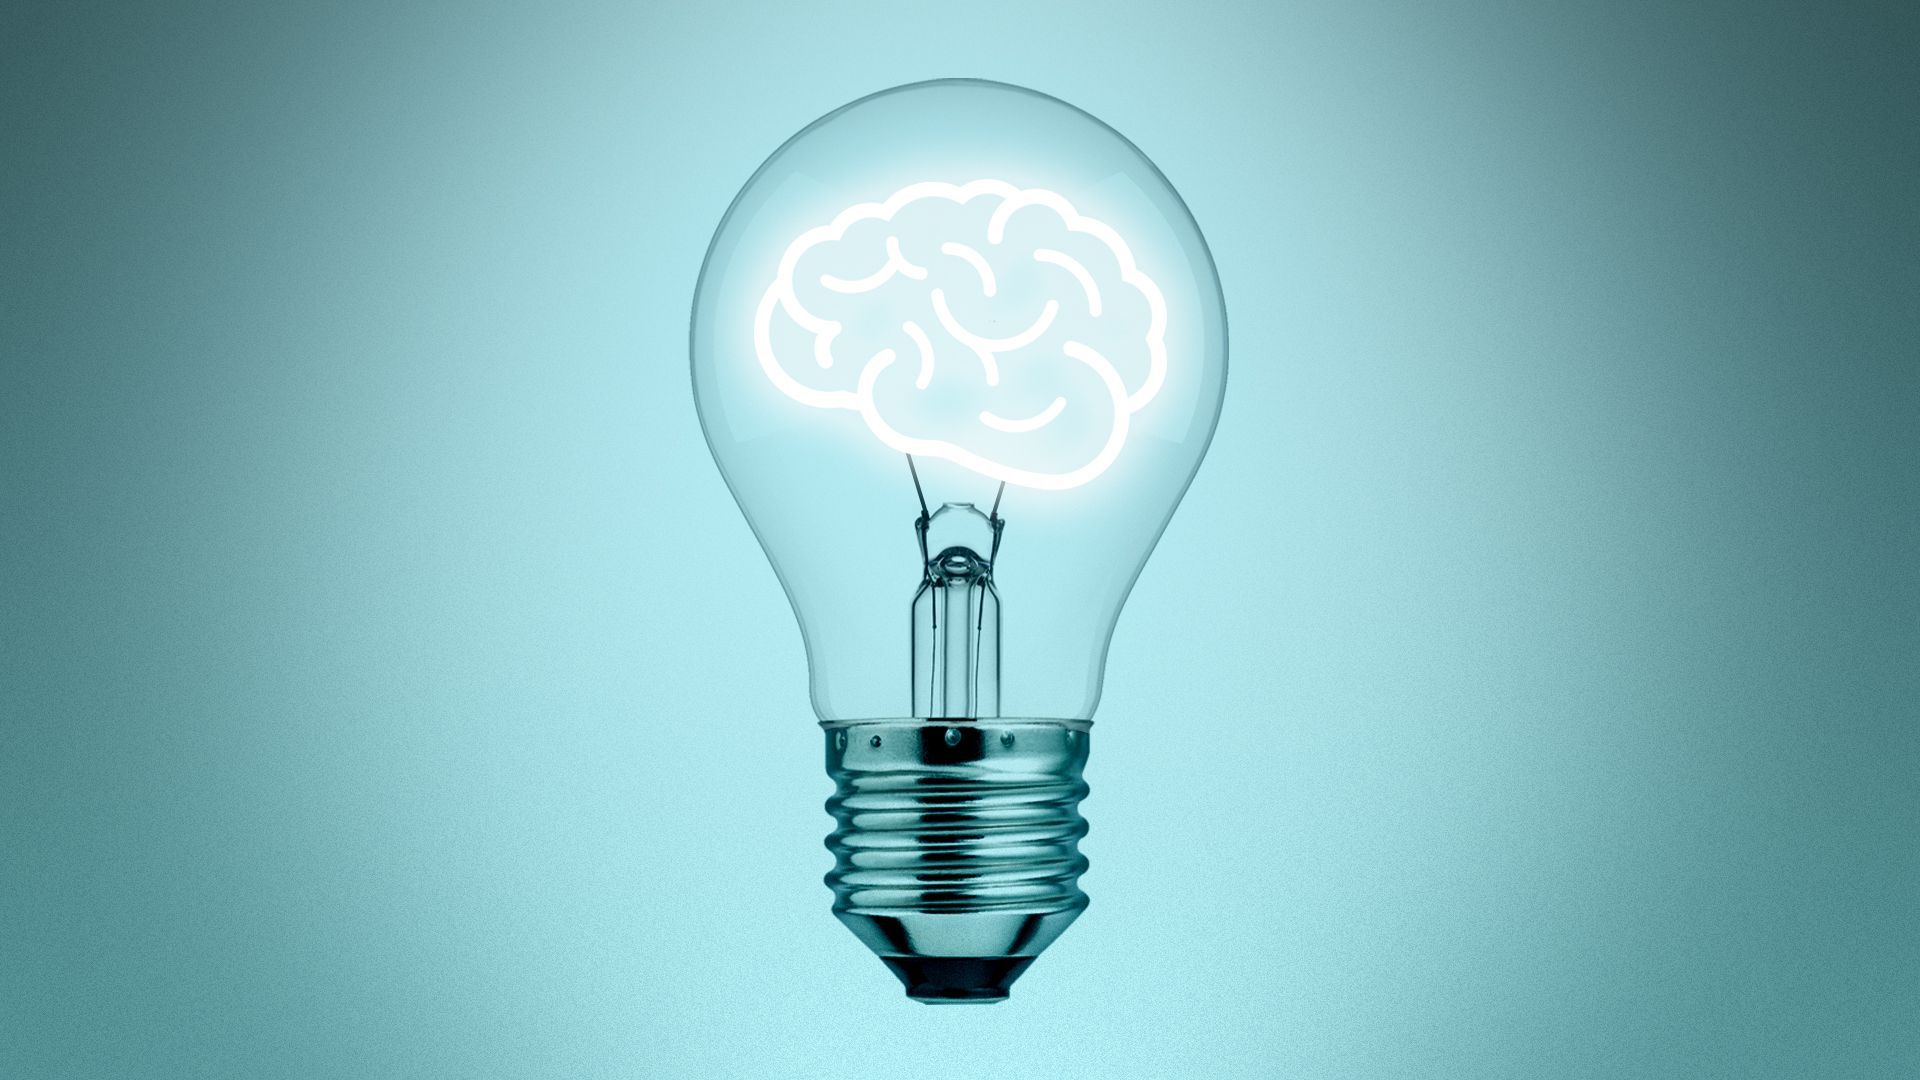 Illustration of a lightbulb with a brain-shaped filament 